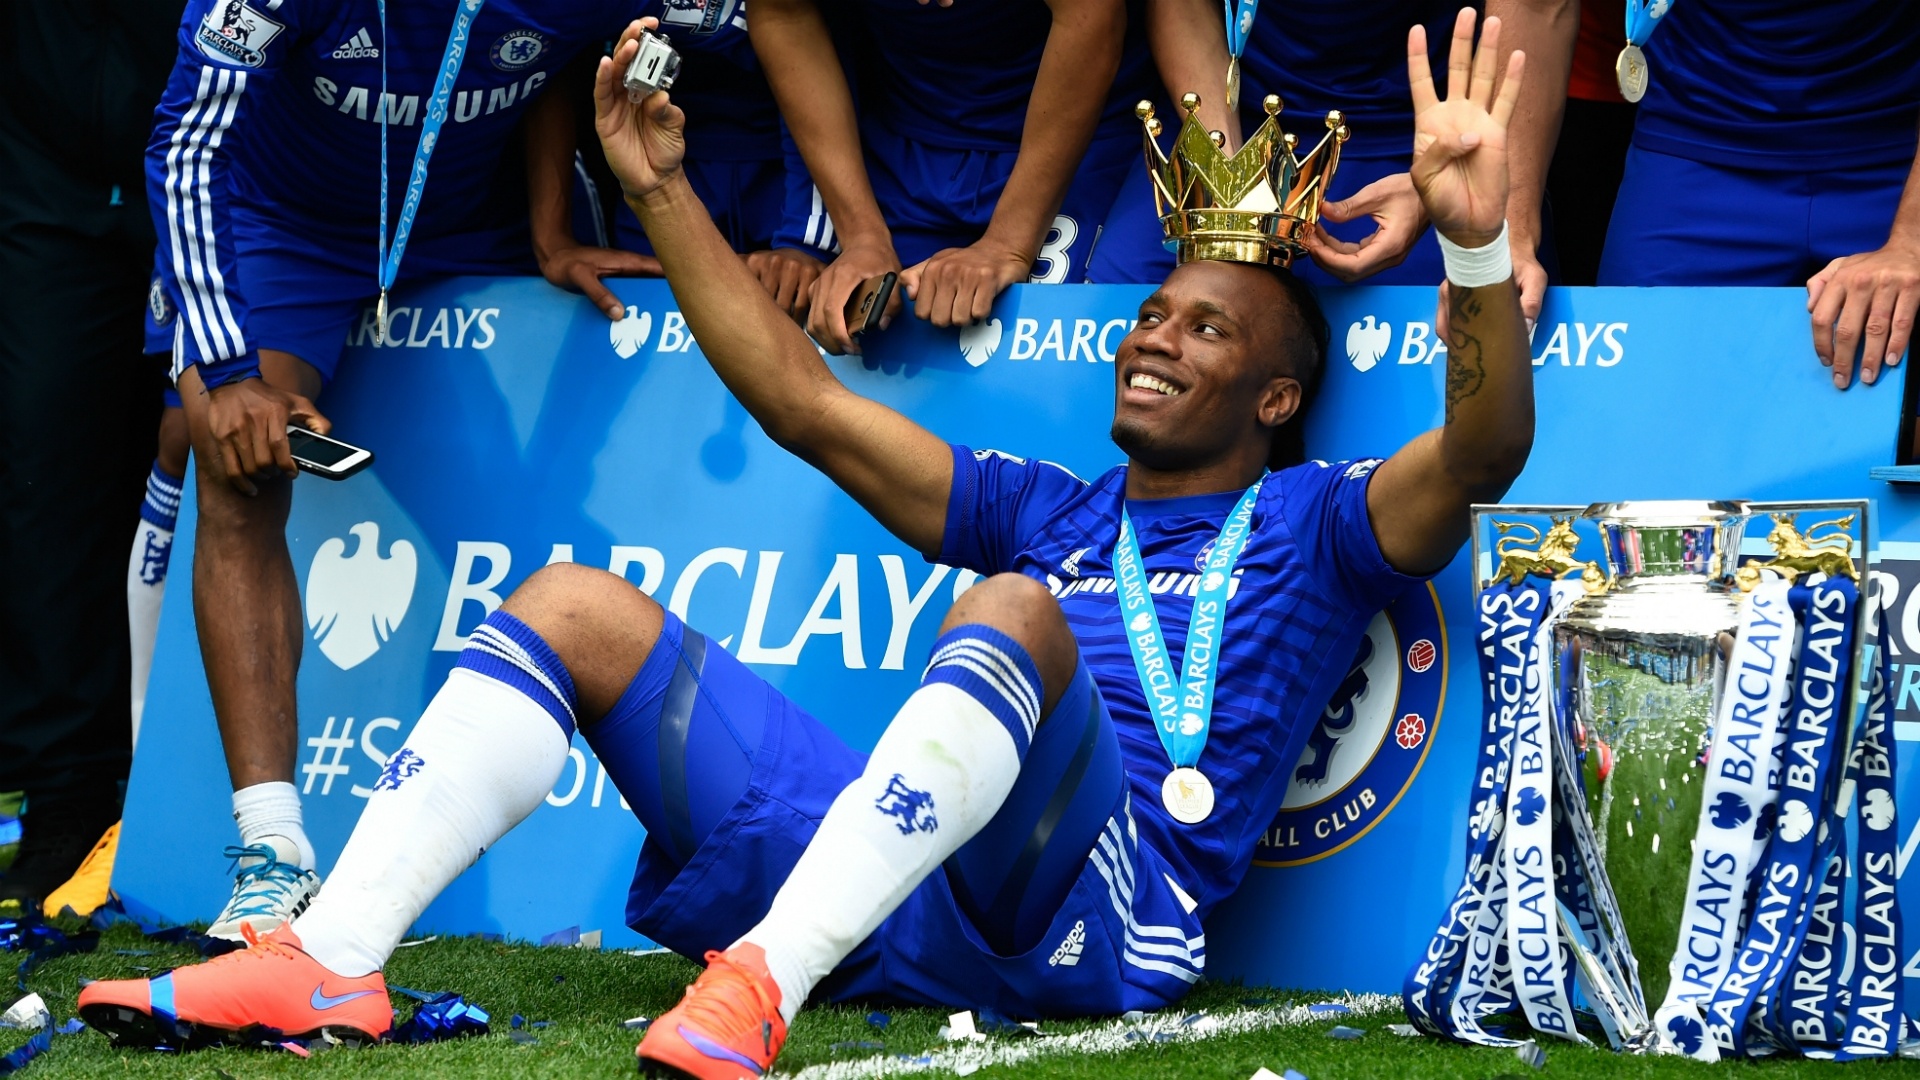 Drogba: Soccer star, Barclays Spirit of the Game Award, 2015. 1920x1080 Full HD Background.